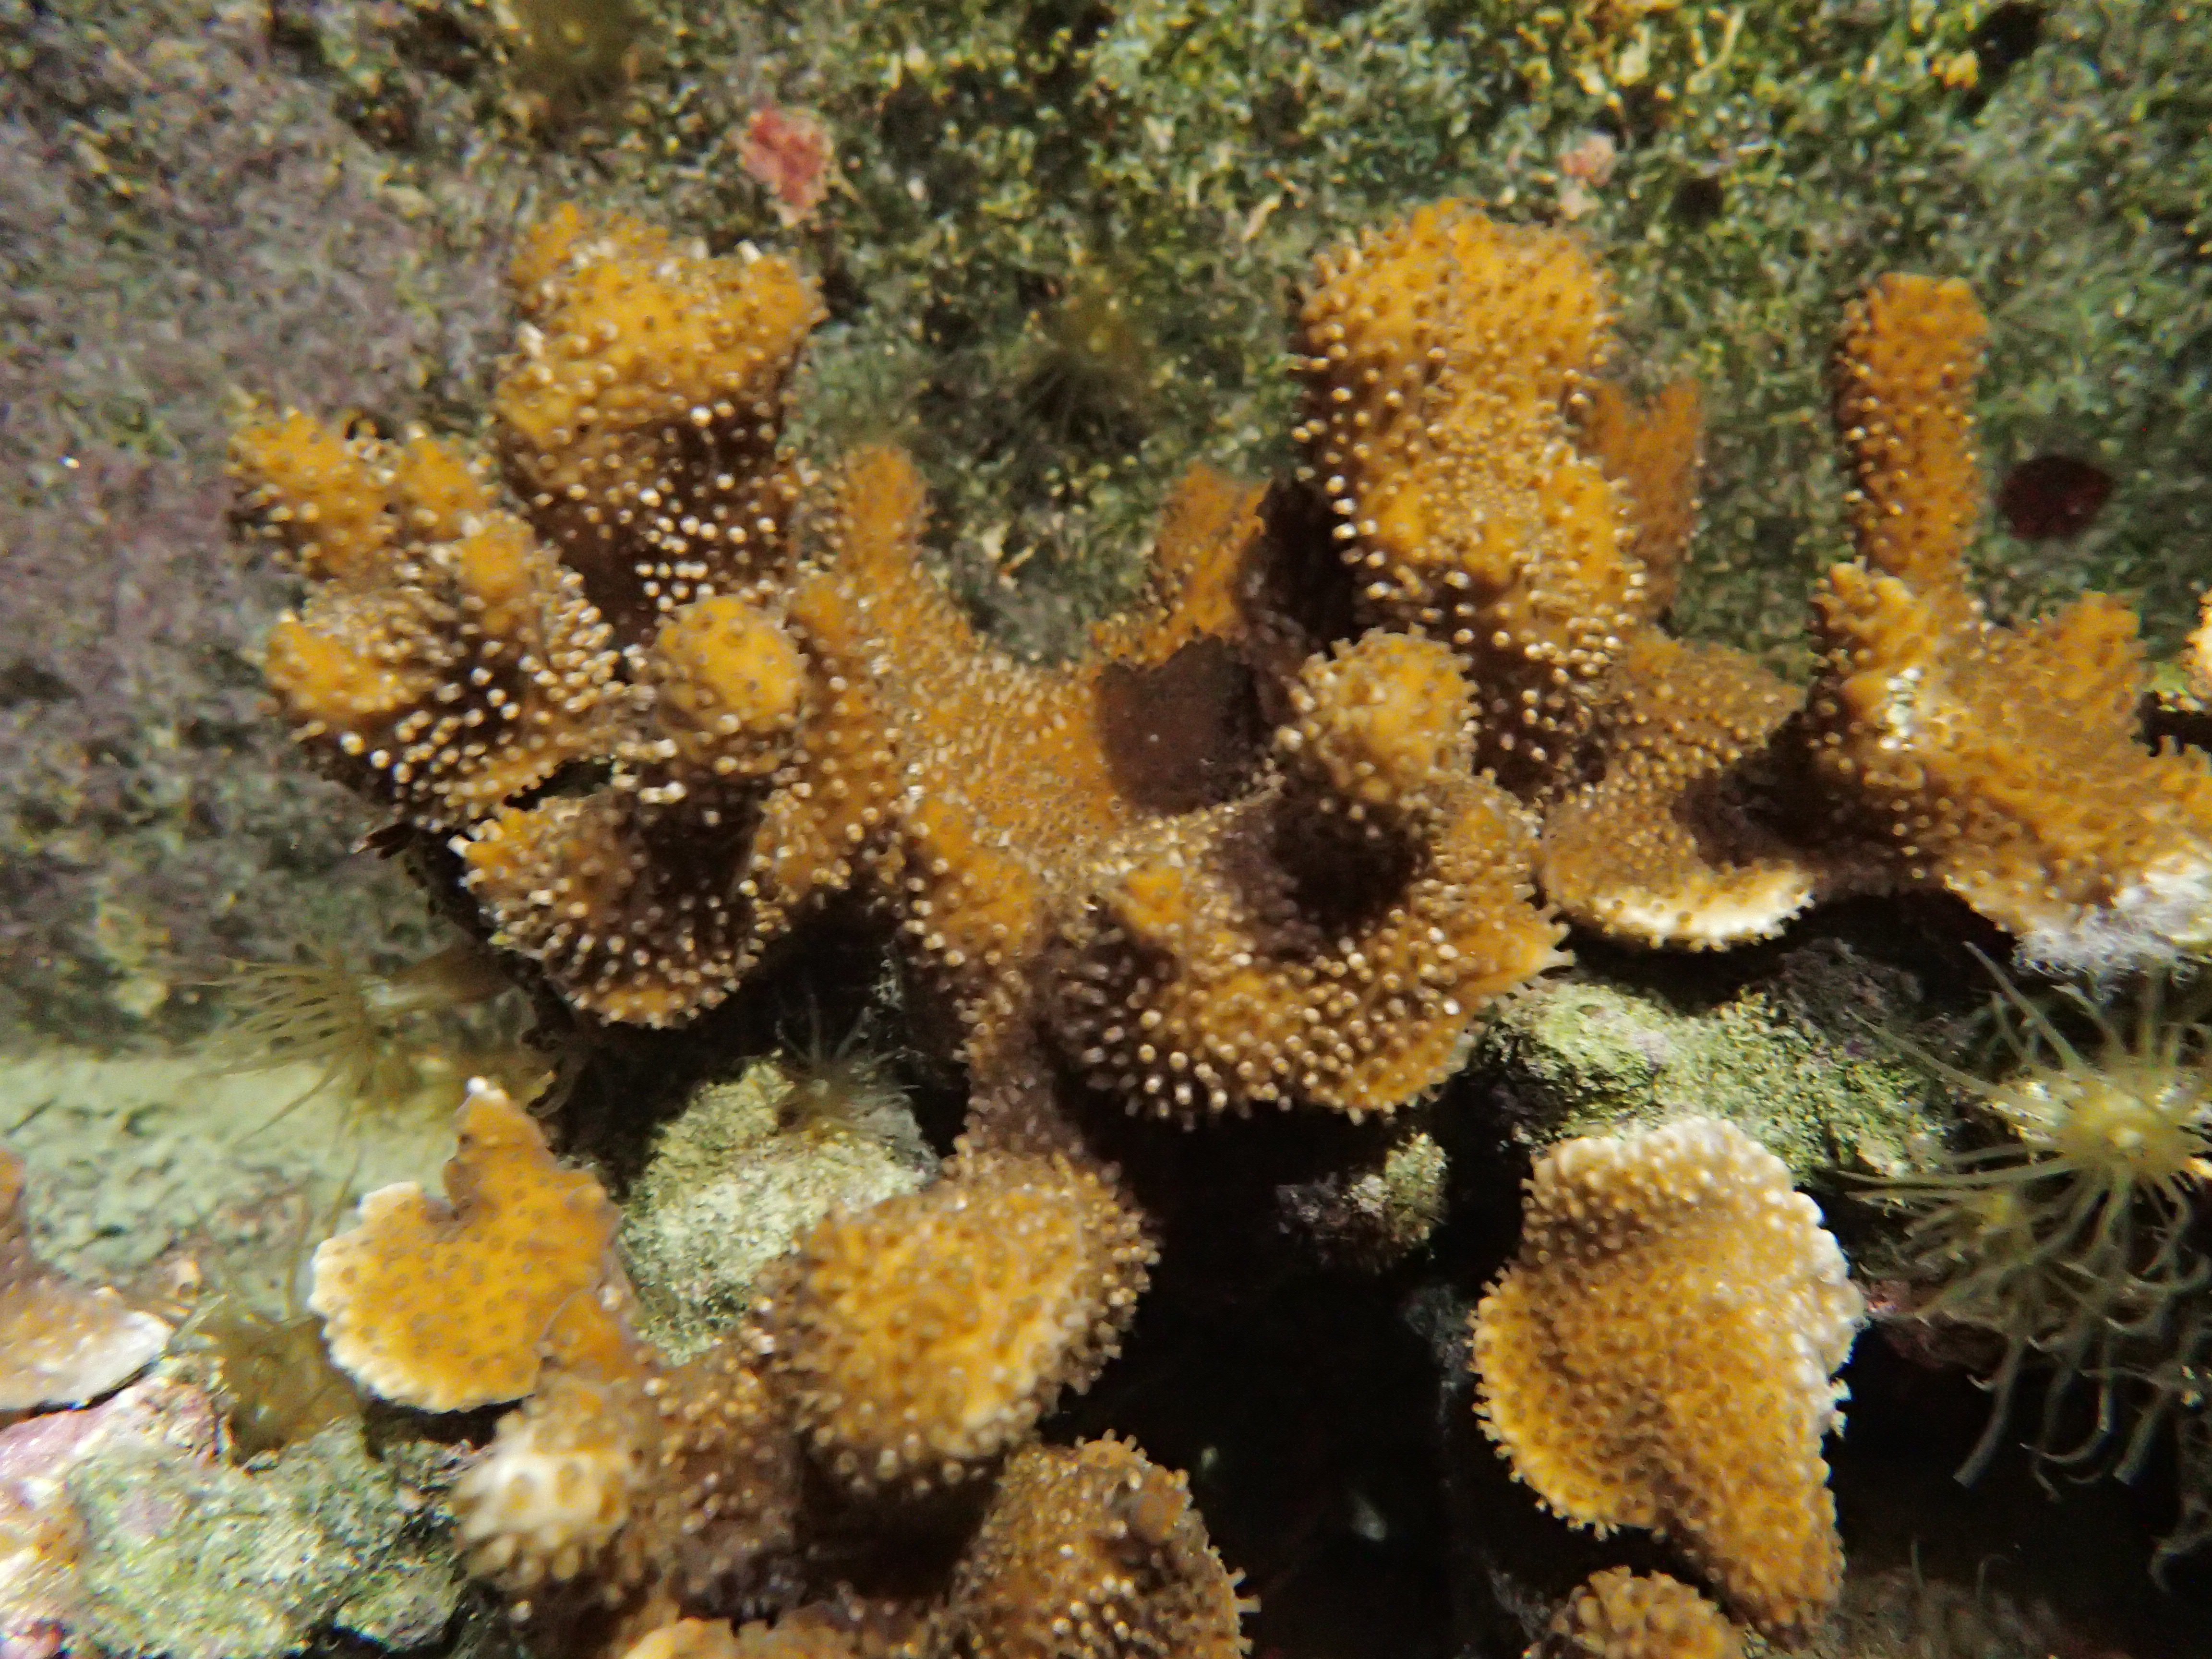 Coral releasing eggs and sperm during spawning